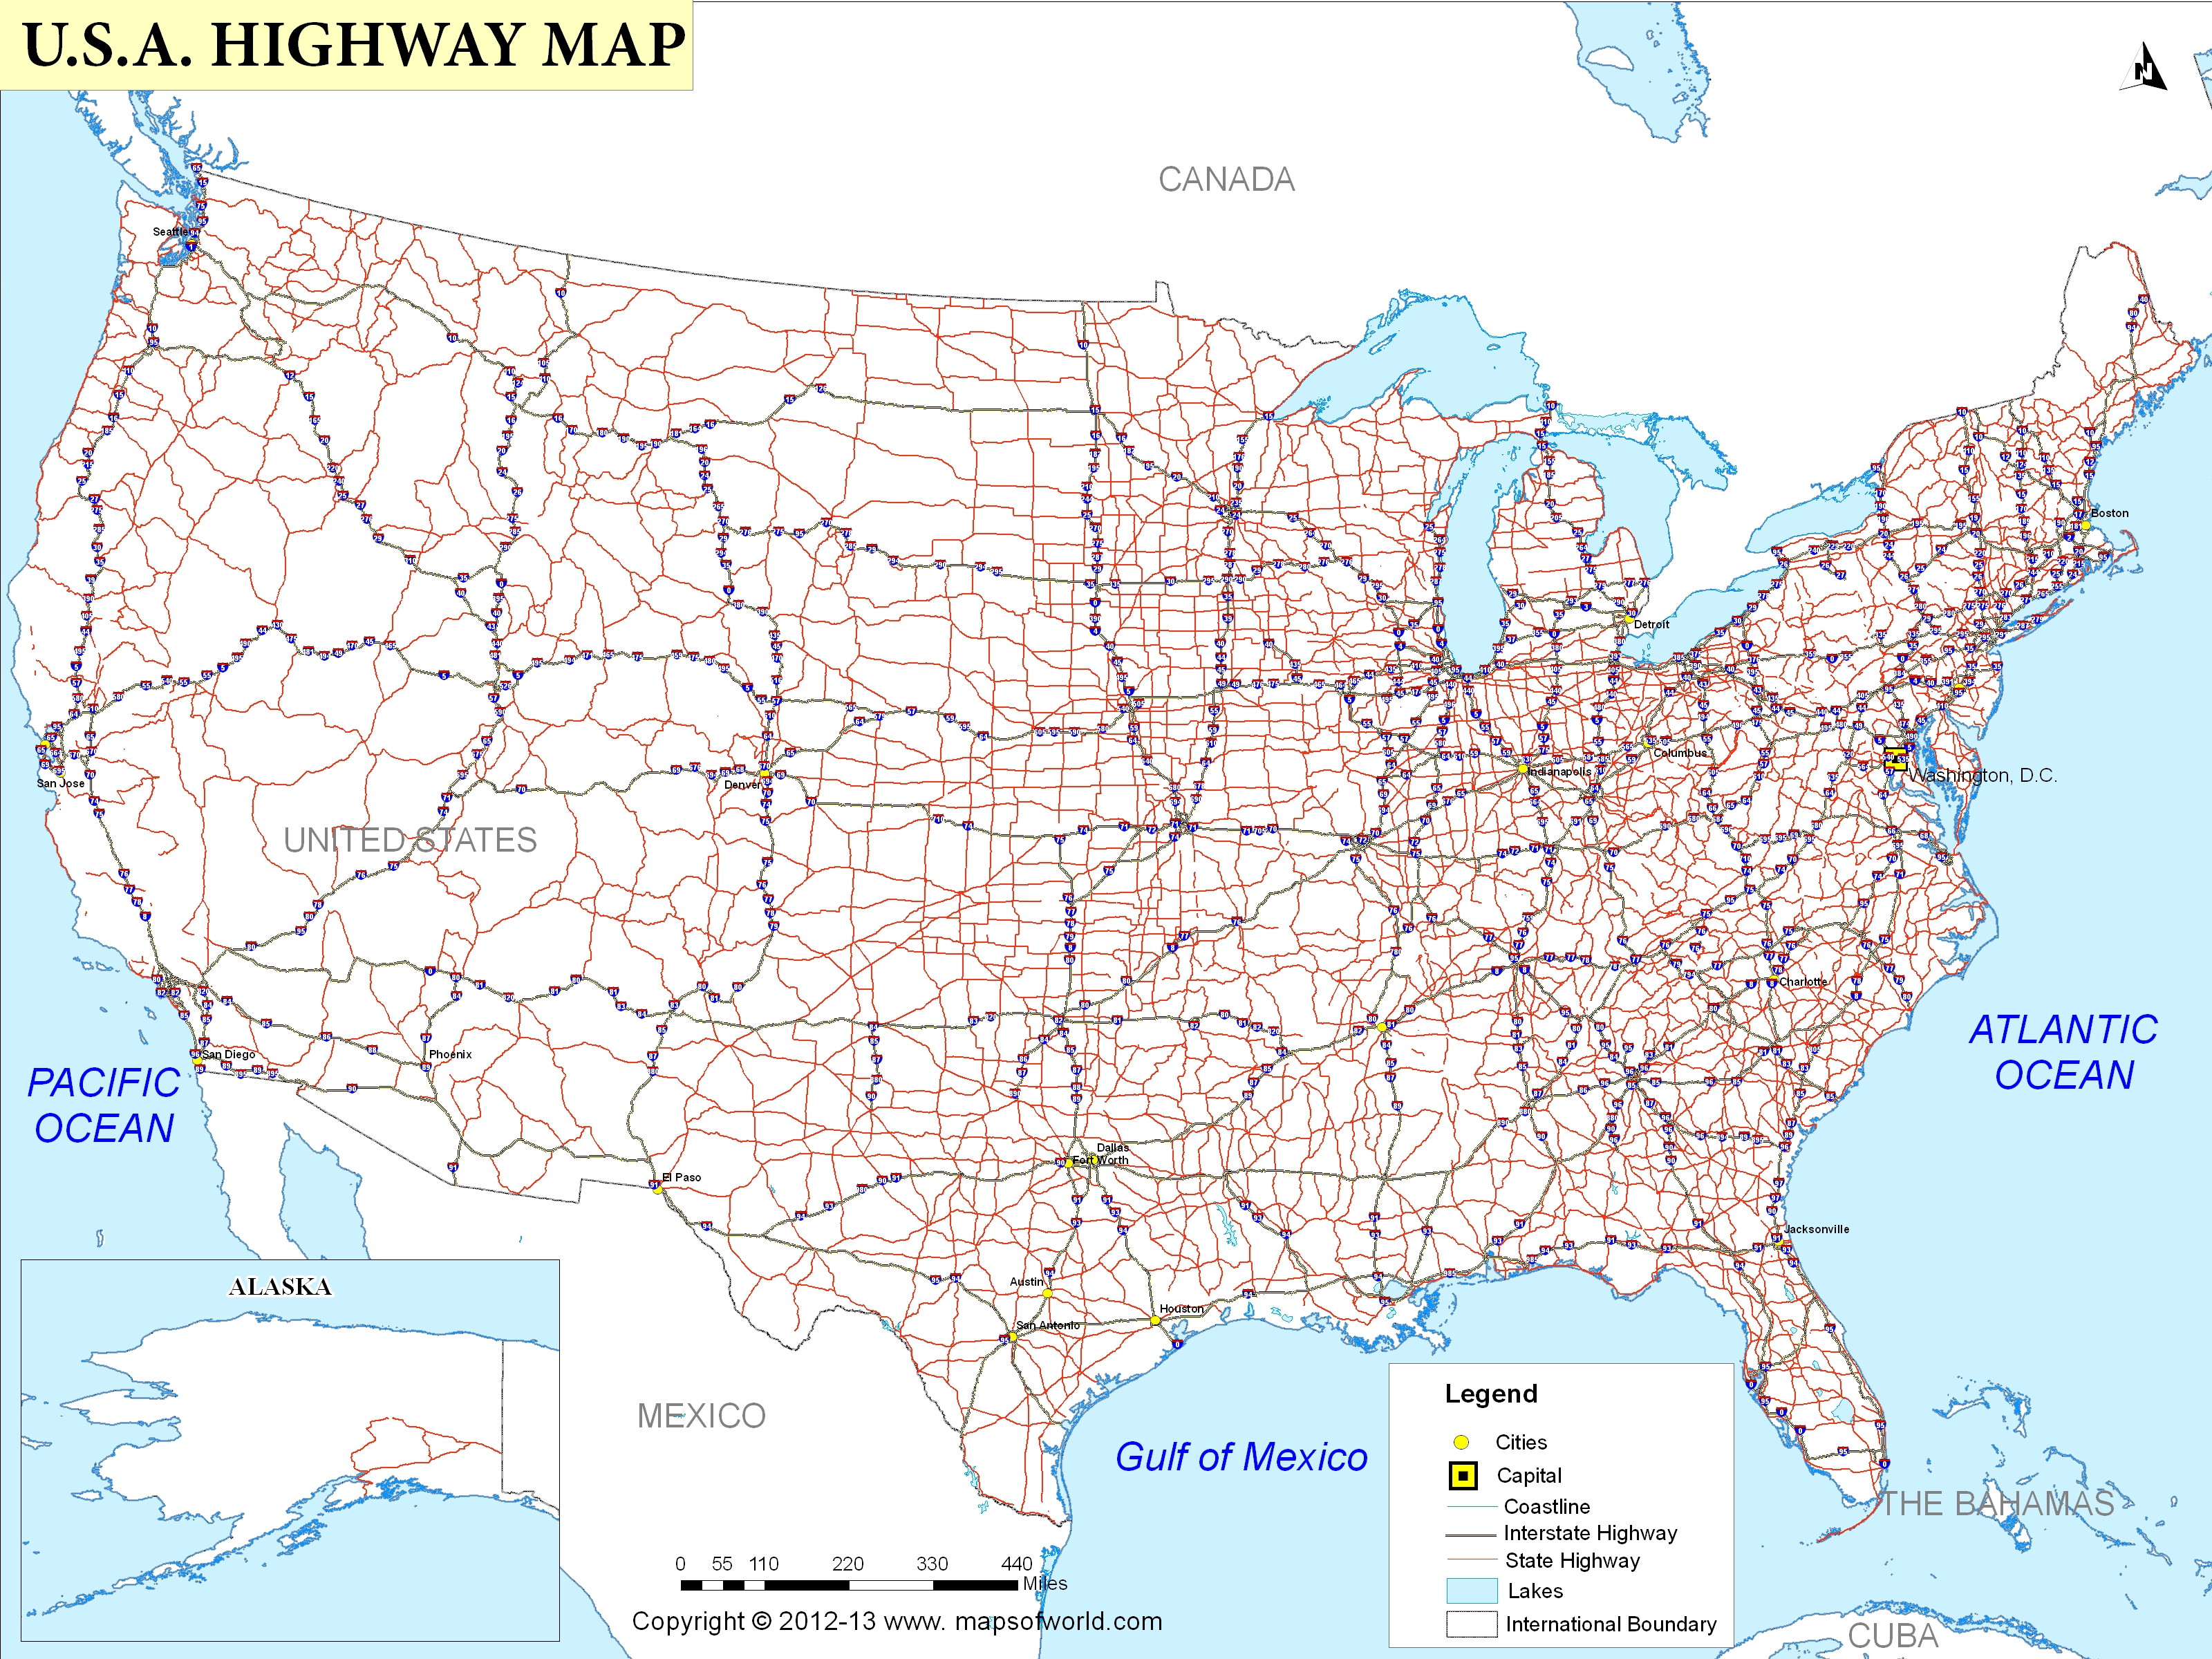 6-best-images-of-united-states-highway-map-printable-united-states